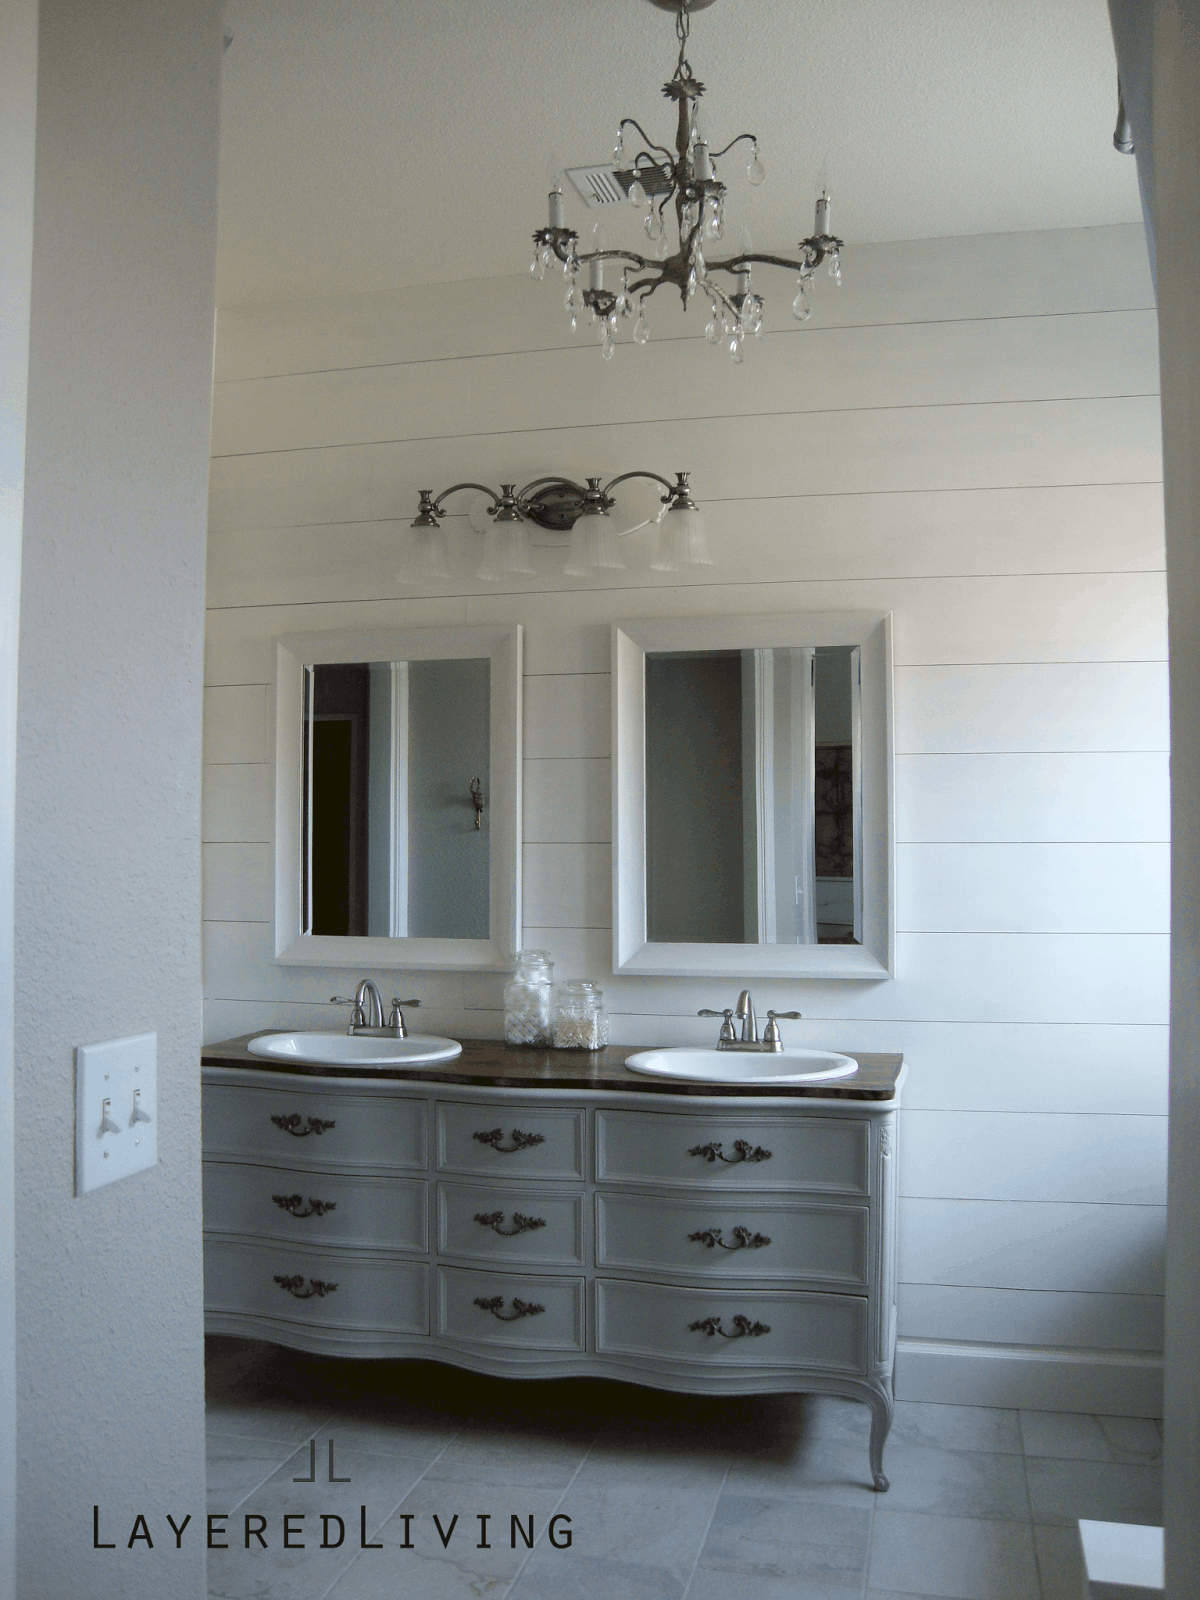 Convert an old dresser into a vanity to give a charming unique look to your bathroom remodel 